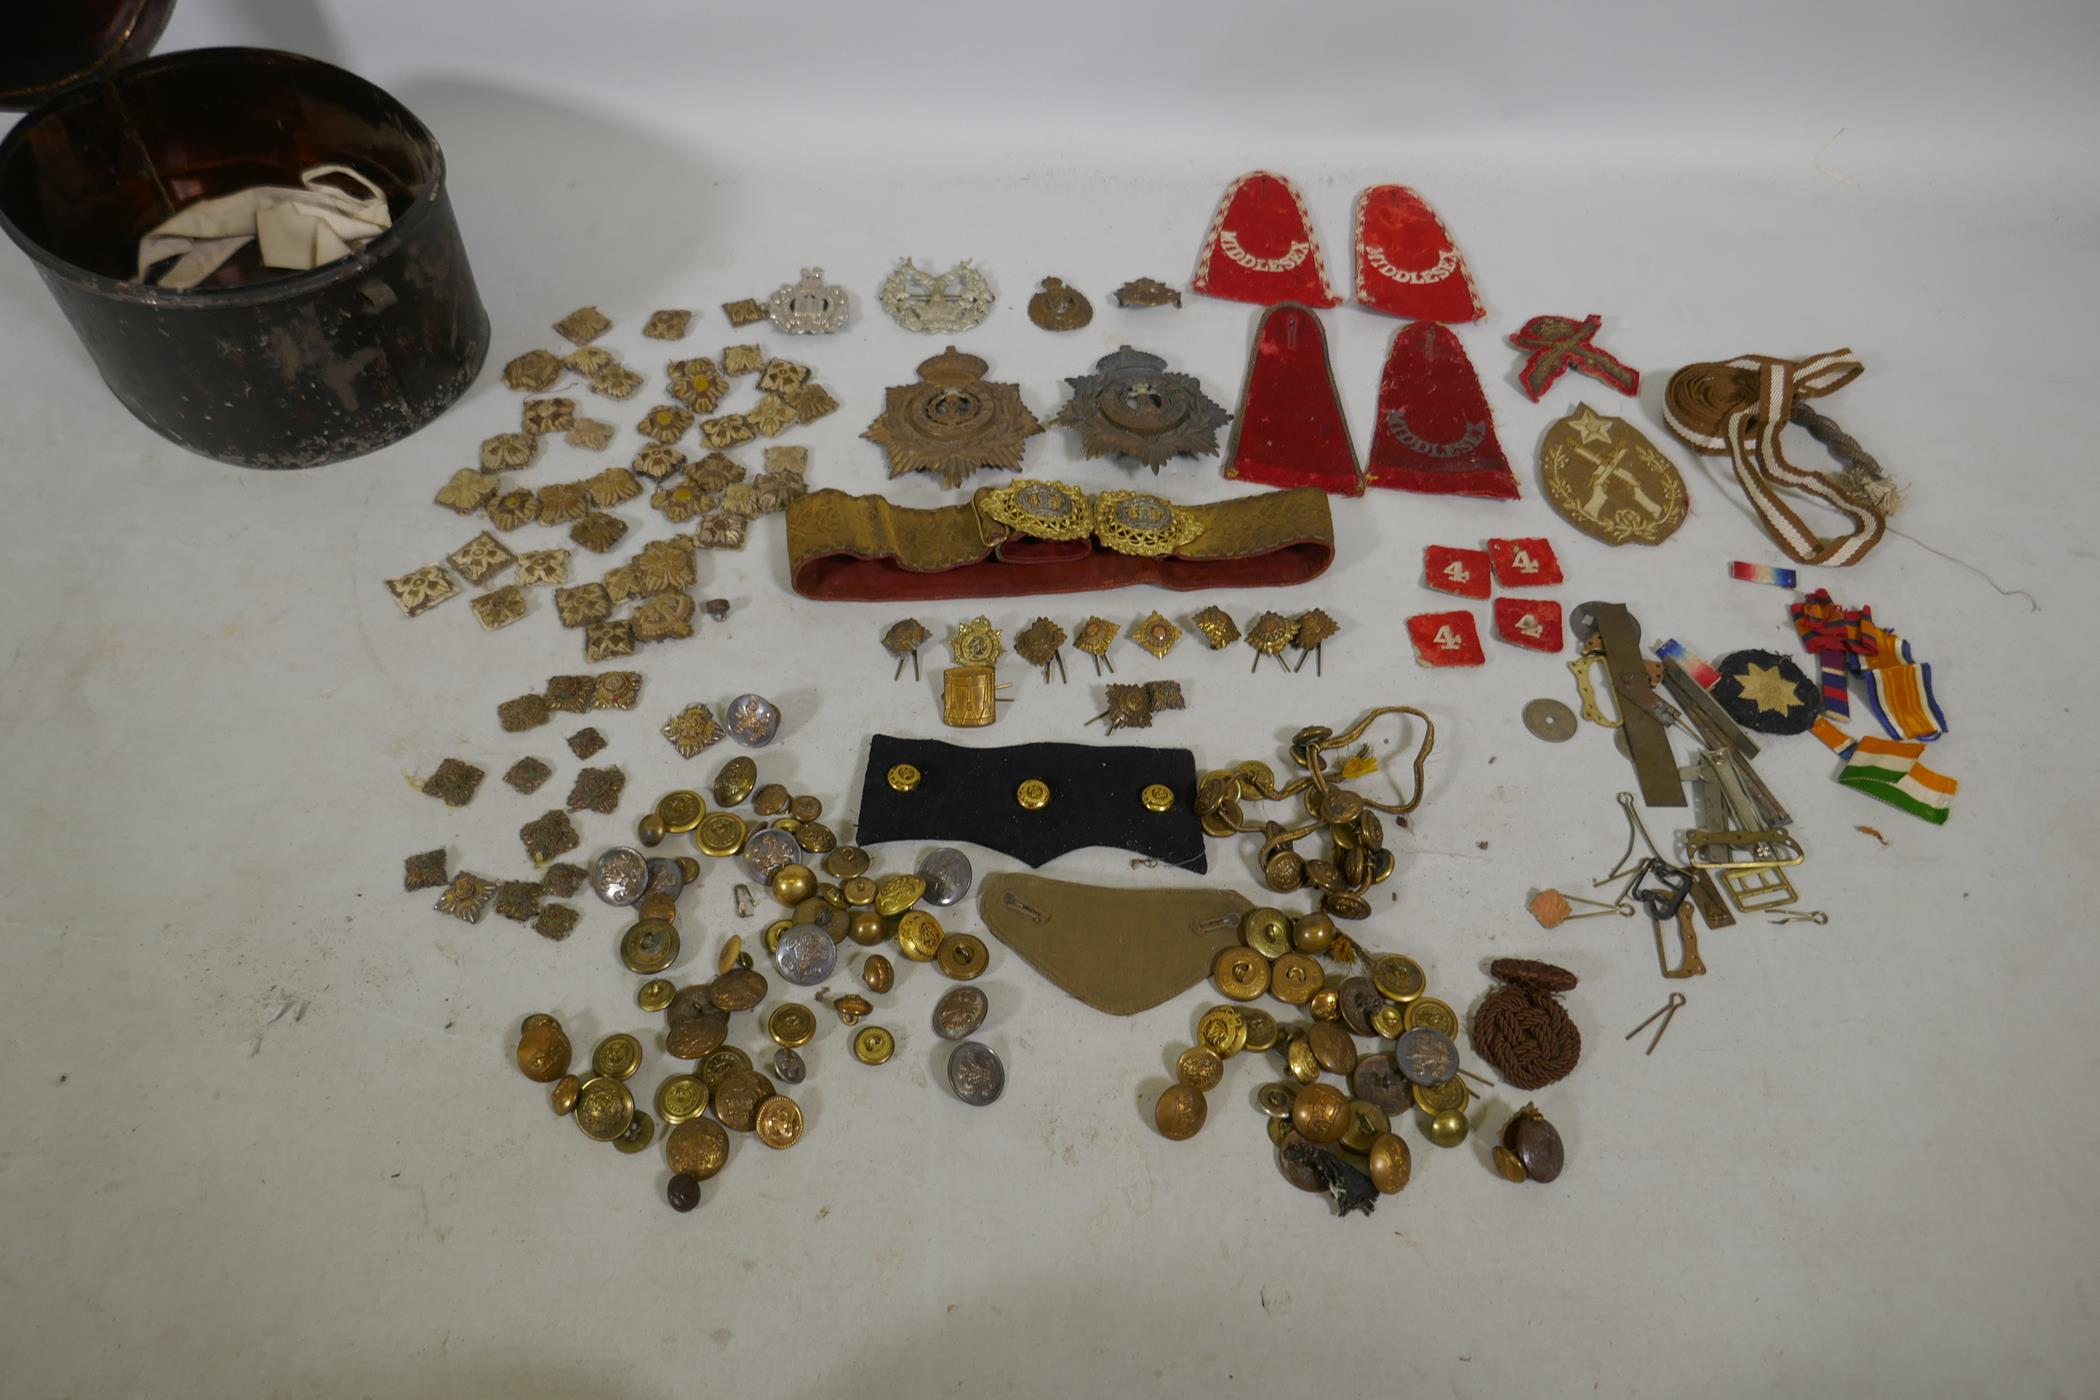 Regimental cap/shako badges and military buttons, Middlesex Regiment, Royal Engineers, Kings